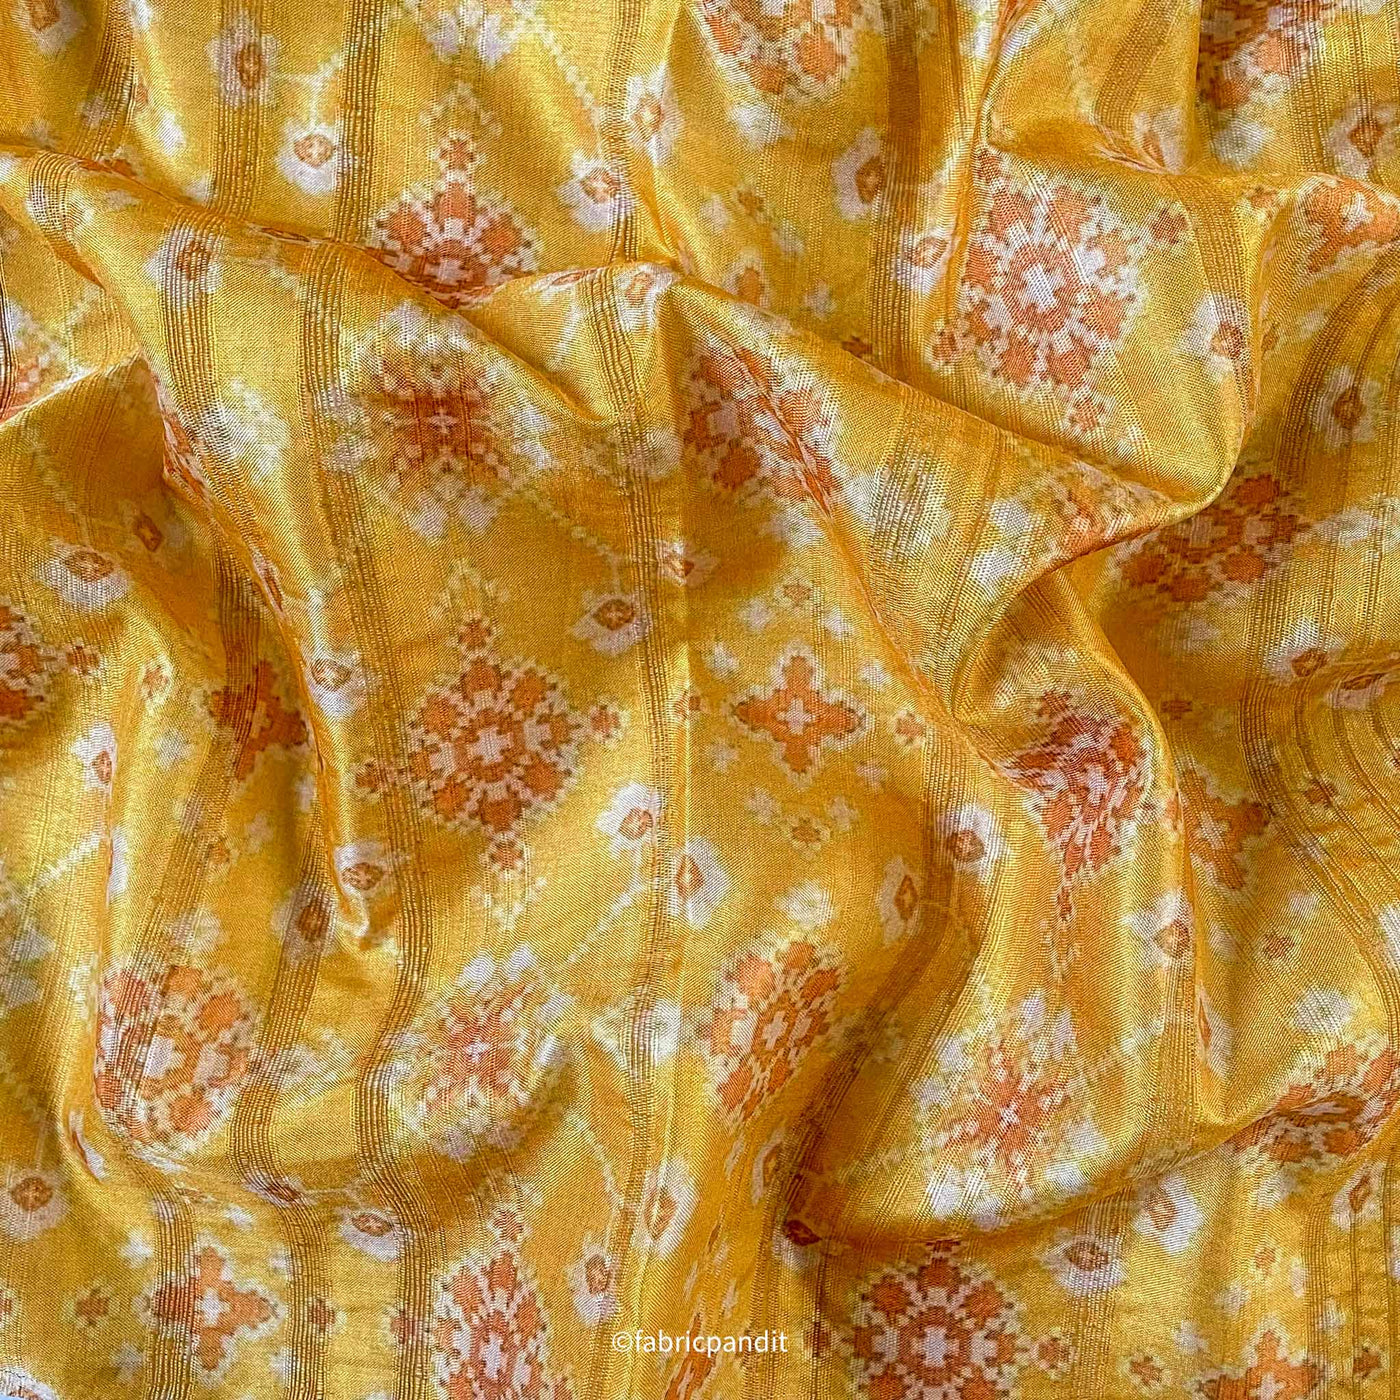 Fabric Pandit Fabric Classic Yellow Abstract Patola Digital Printed Tussar Silk Fabric (Width 44 Inches)